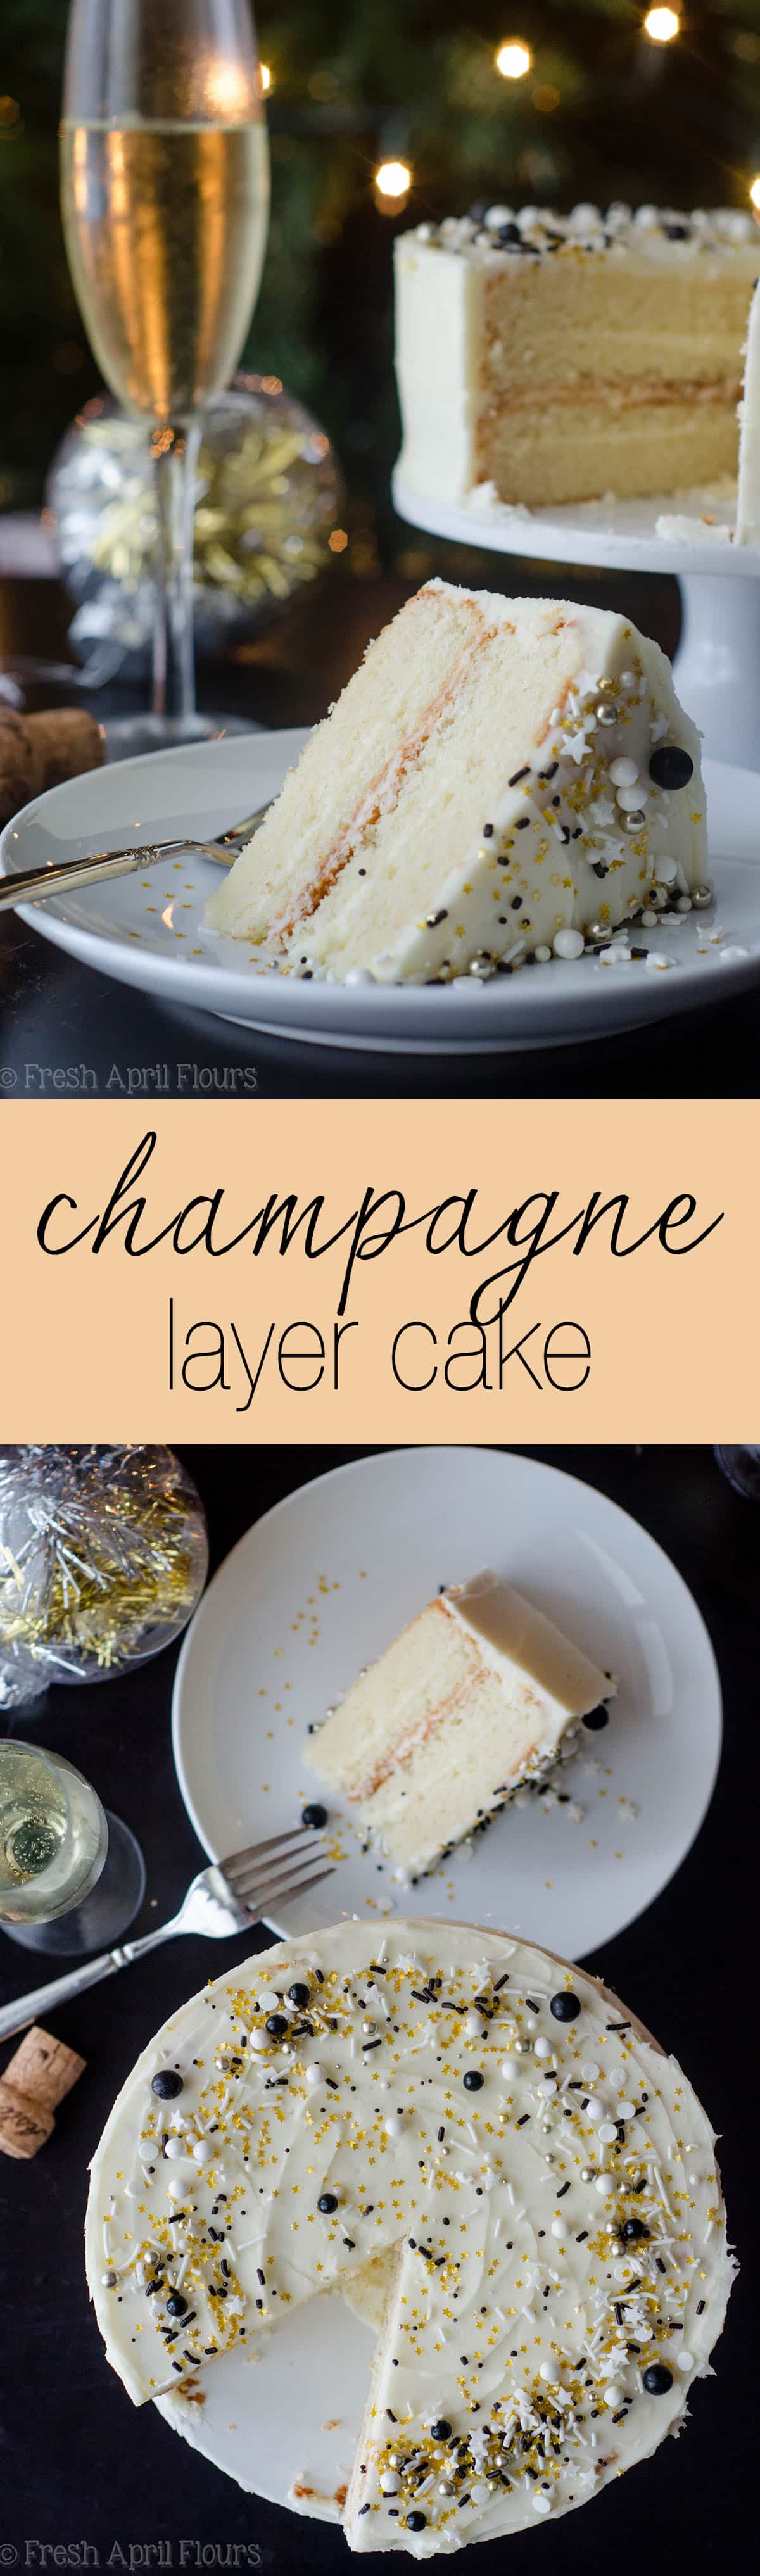 Fluffy and moist white cake packed with a punch of real champagne and topped with a spiked buttercream. via @frshaprilflours